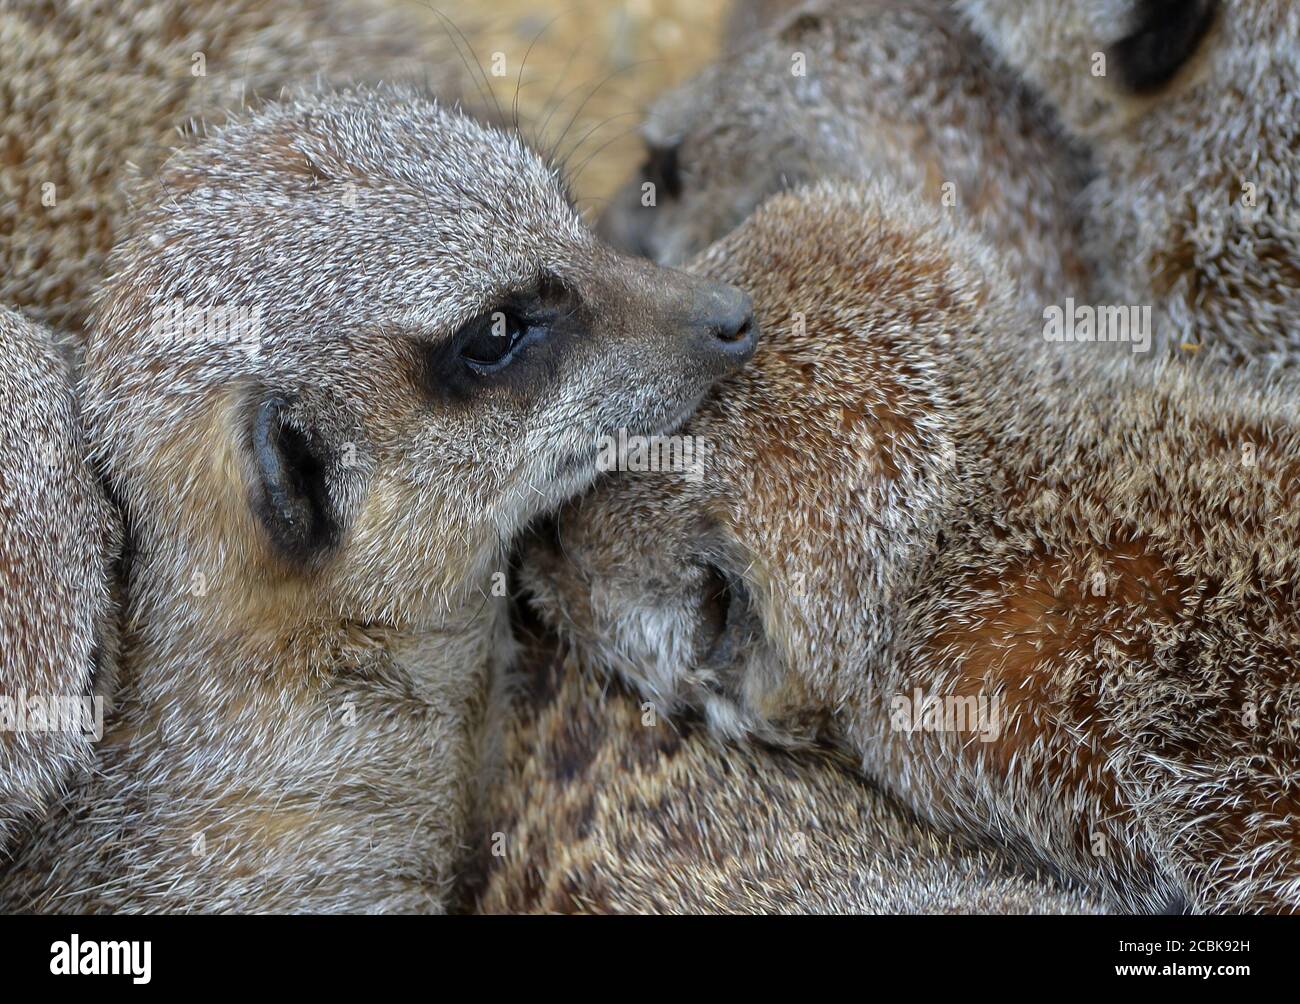 Closeup of a group of Meerkats with the focus on 1 individual Stock Photo